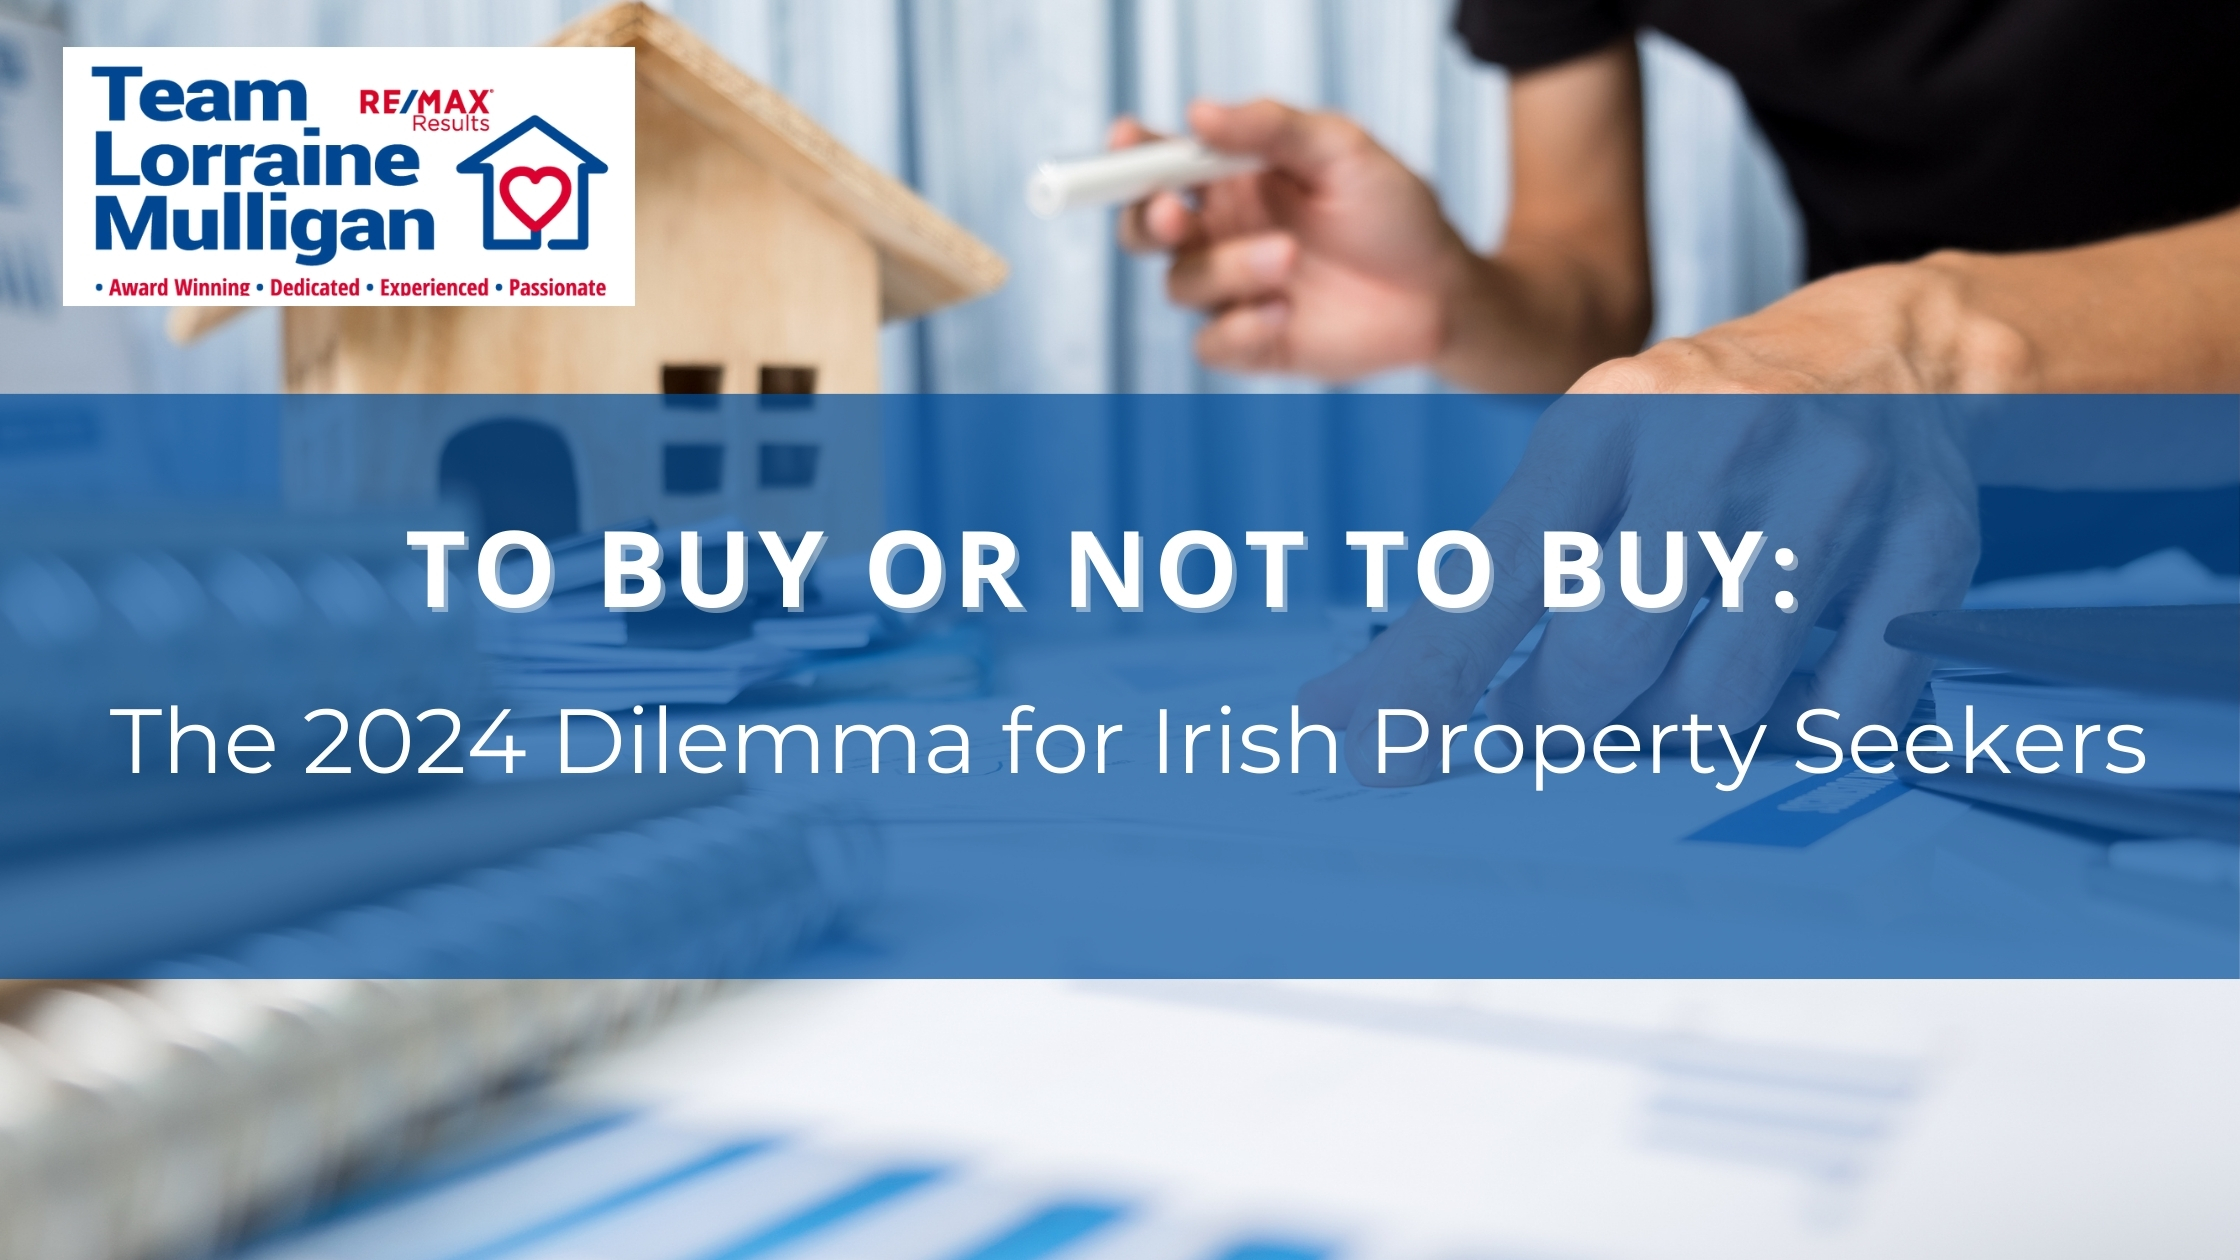 To Buy or Not to Buy: The 2024 Dilemma for Irish Property Seekers